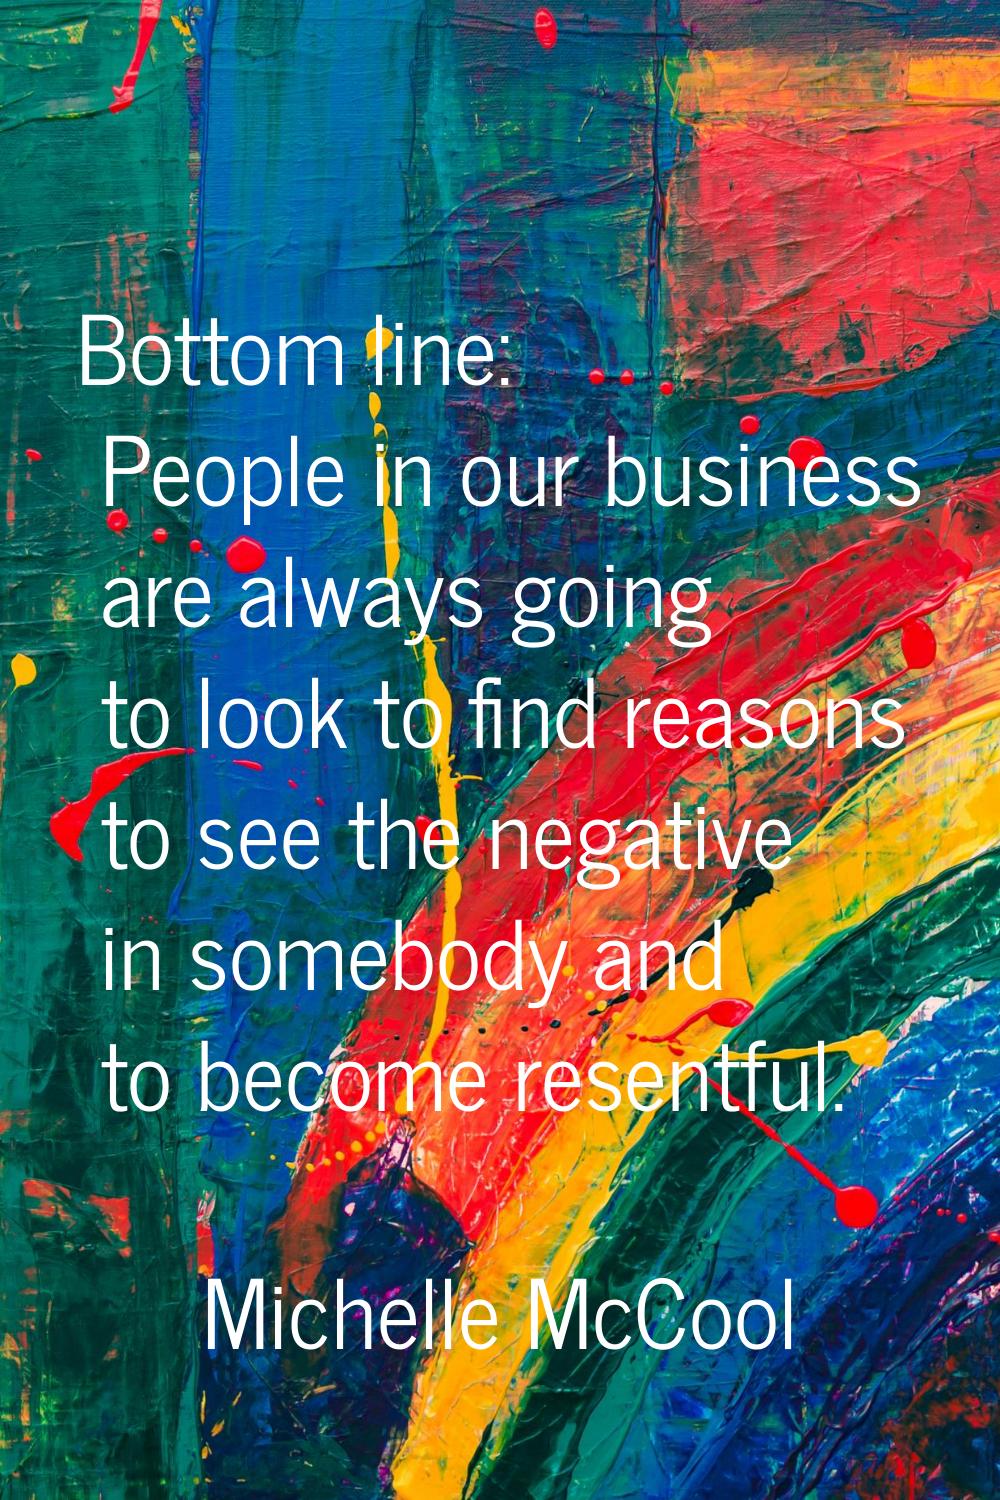 Bottom line: People in our business are always going to look to find reasons to see the negative in